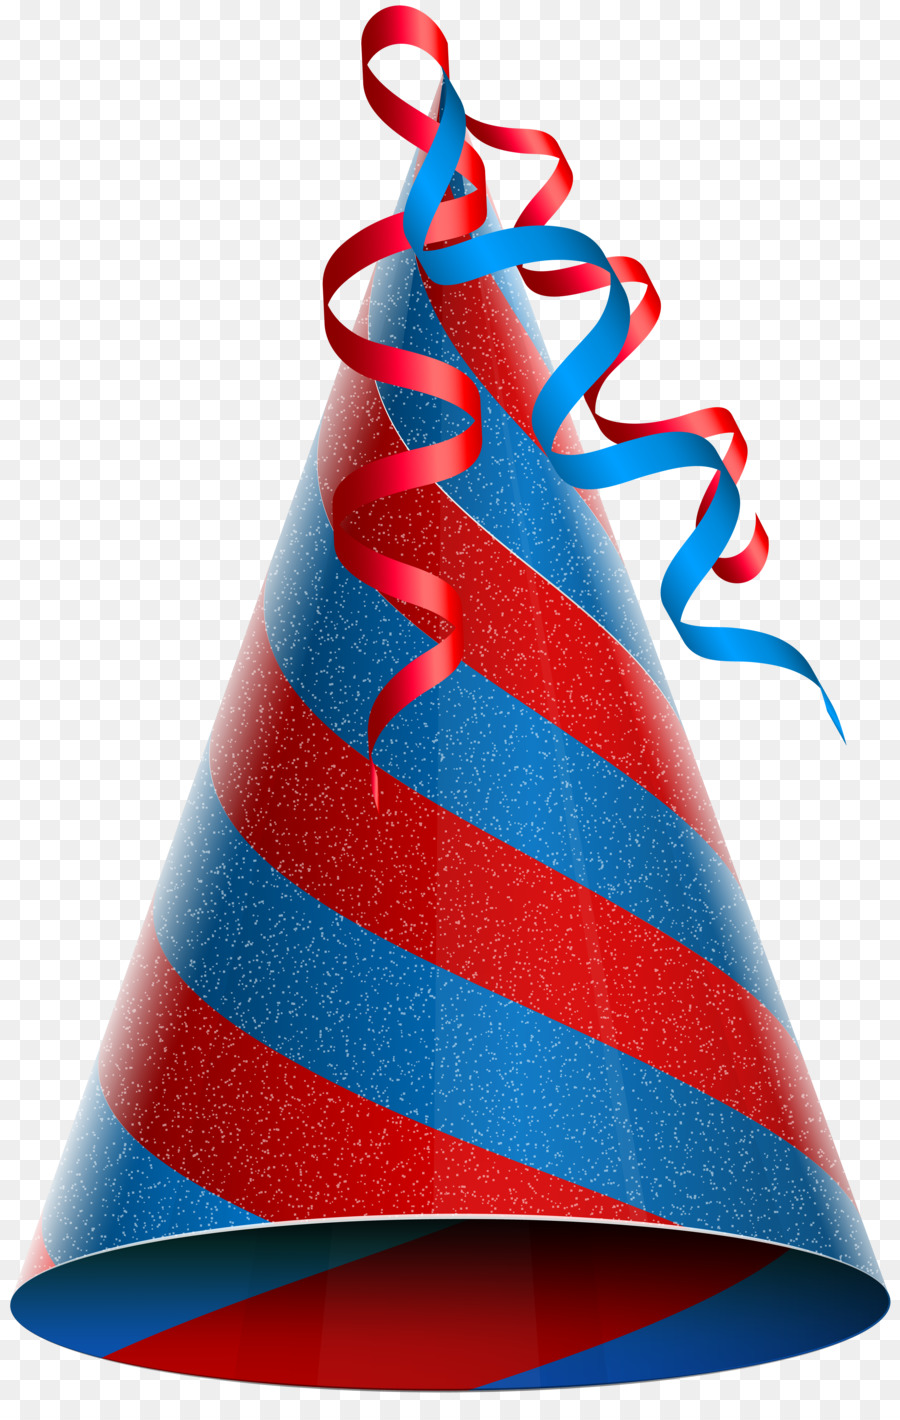 Party hat Birthday Clip art - Birthday png download - 5103*8000 - Free Transparent Party Hat png Download.